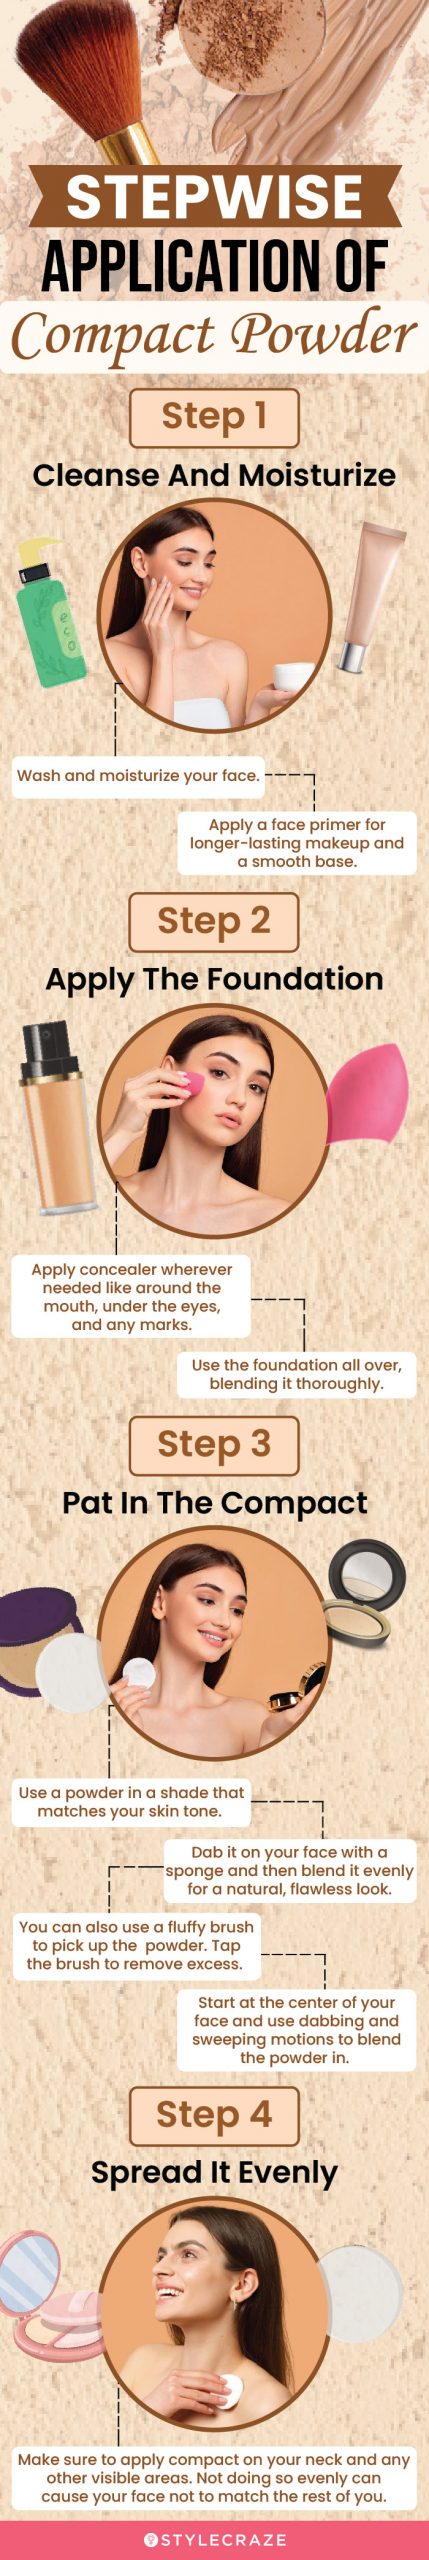 stepwise application of compact powder (infographic)